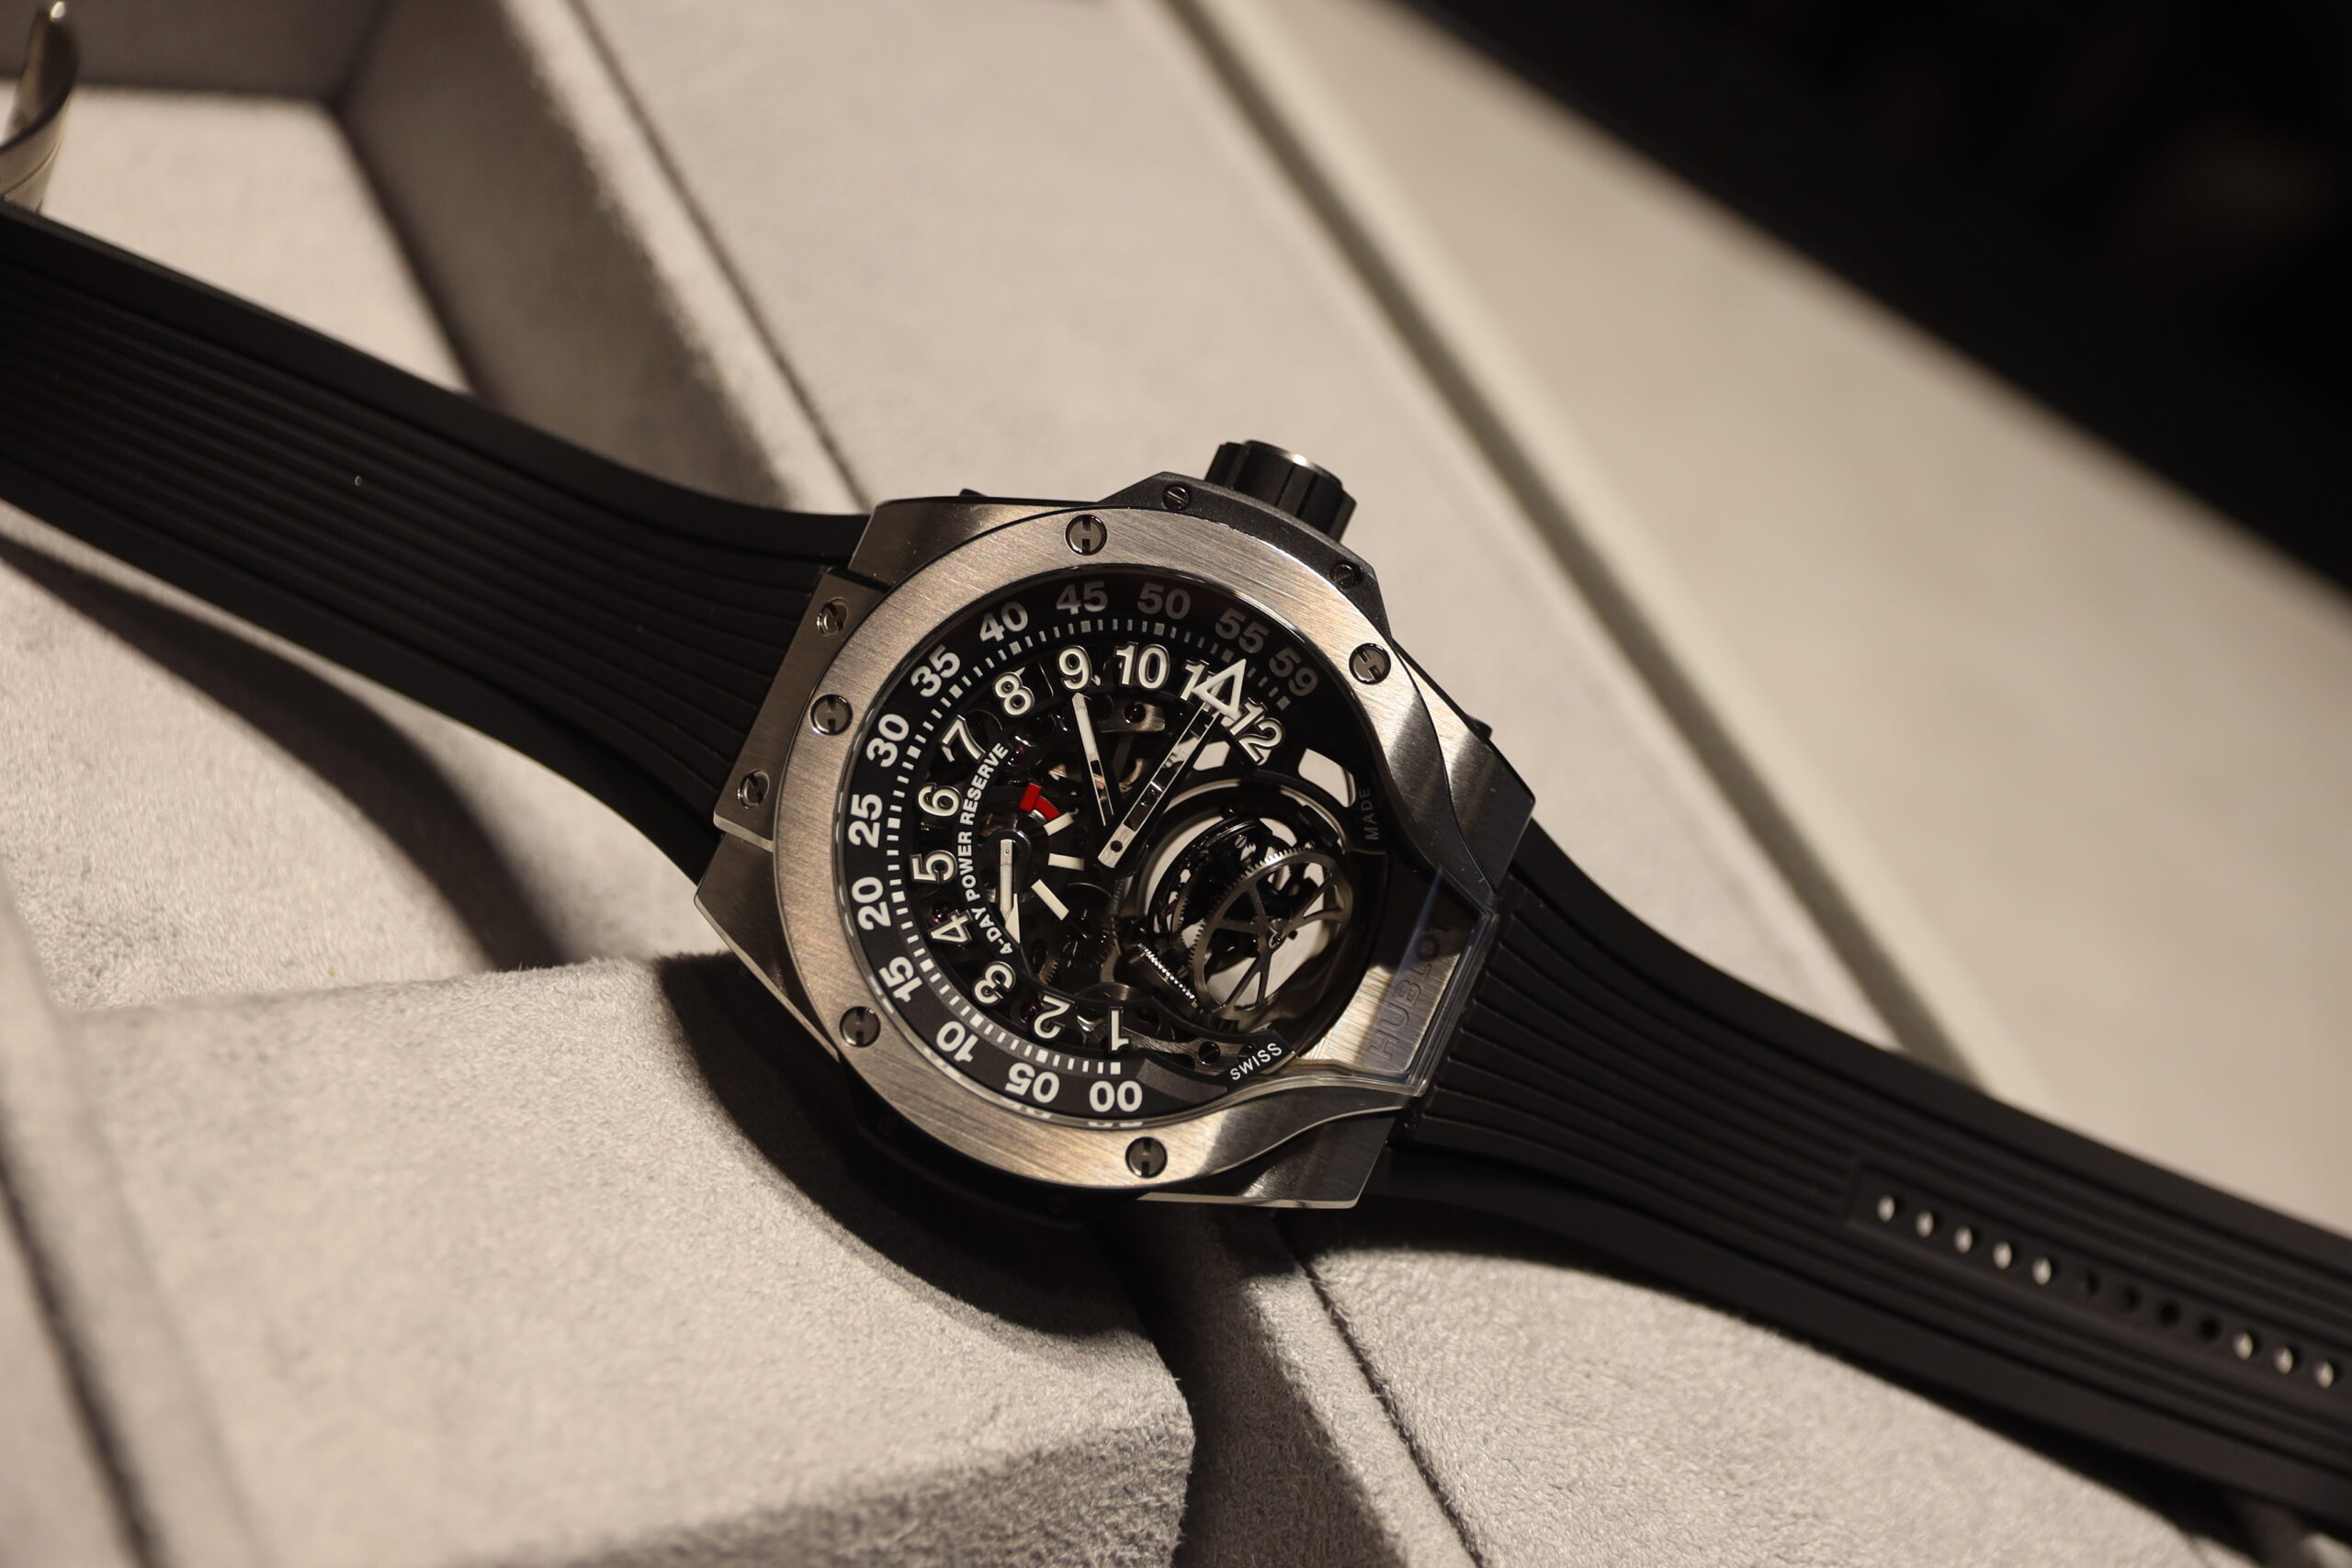 hublot's Latest at Watches and Wonders 2022 Part 1 